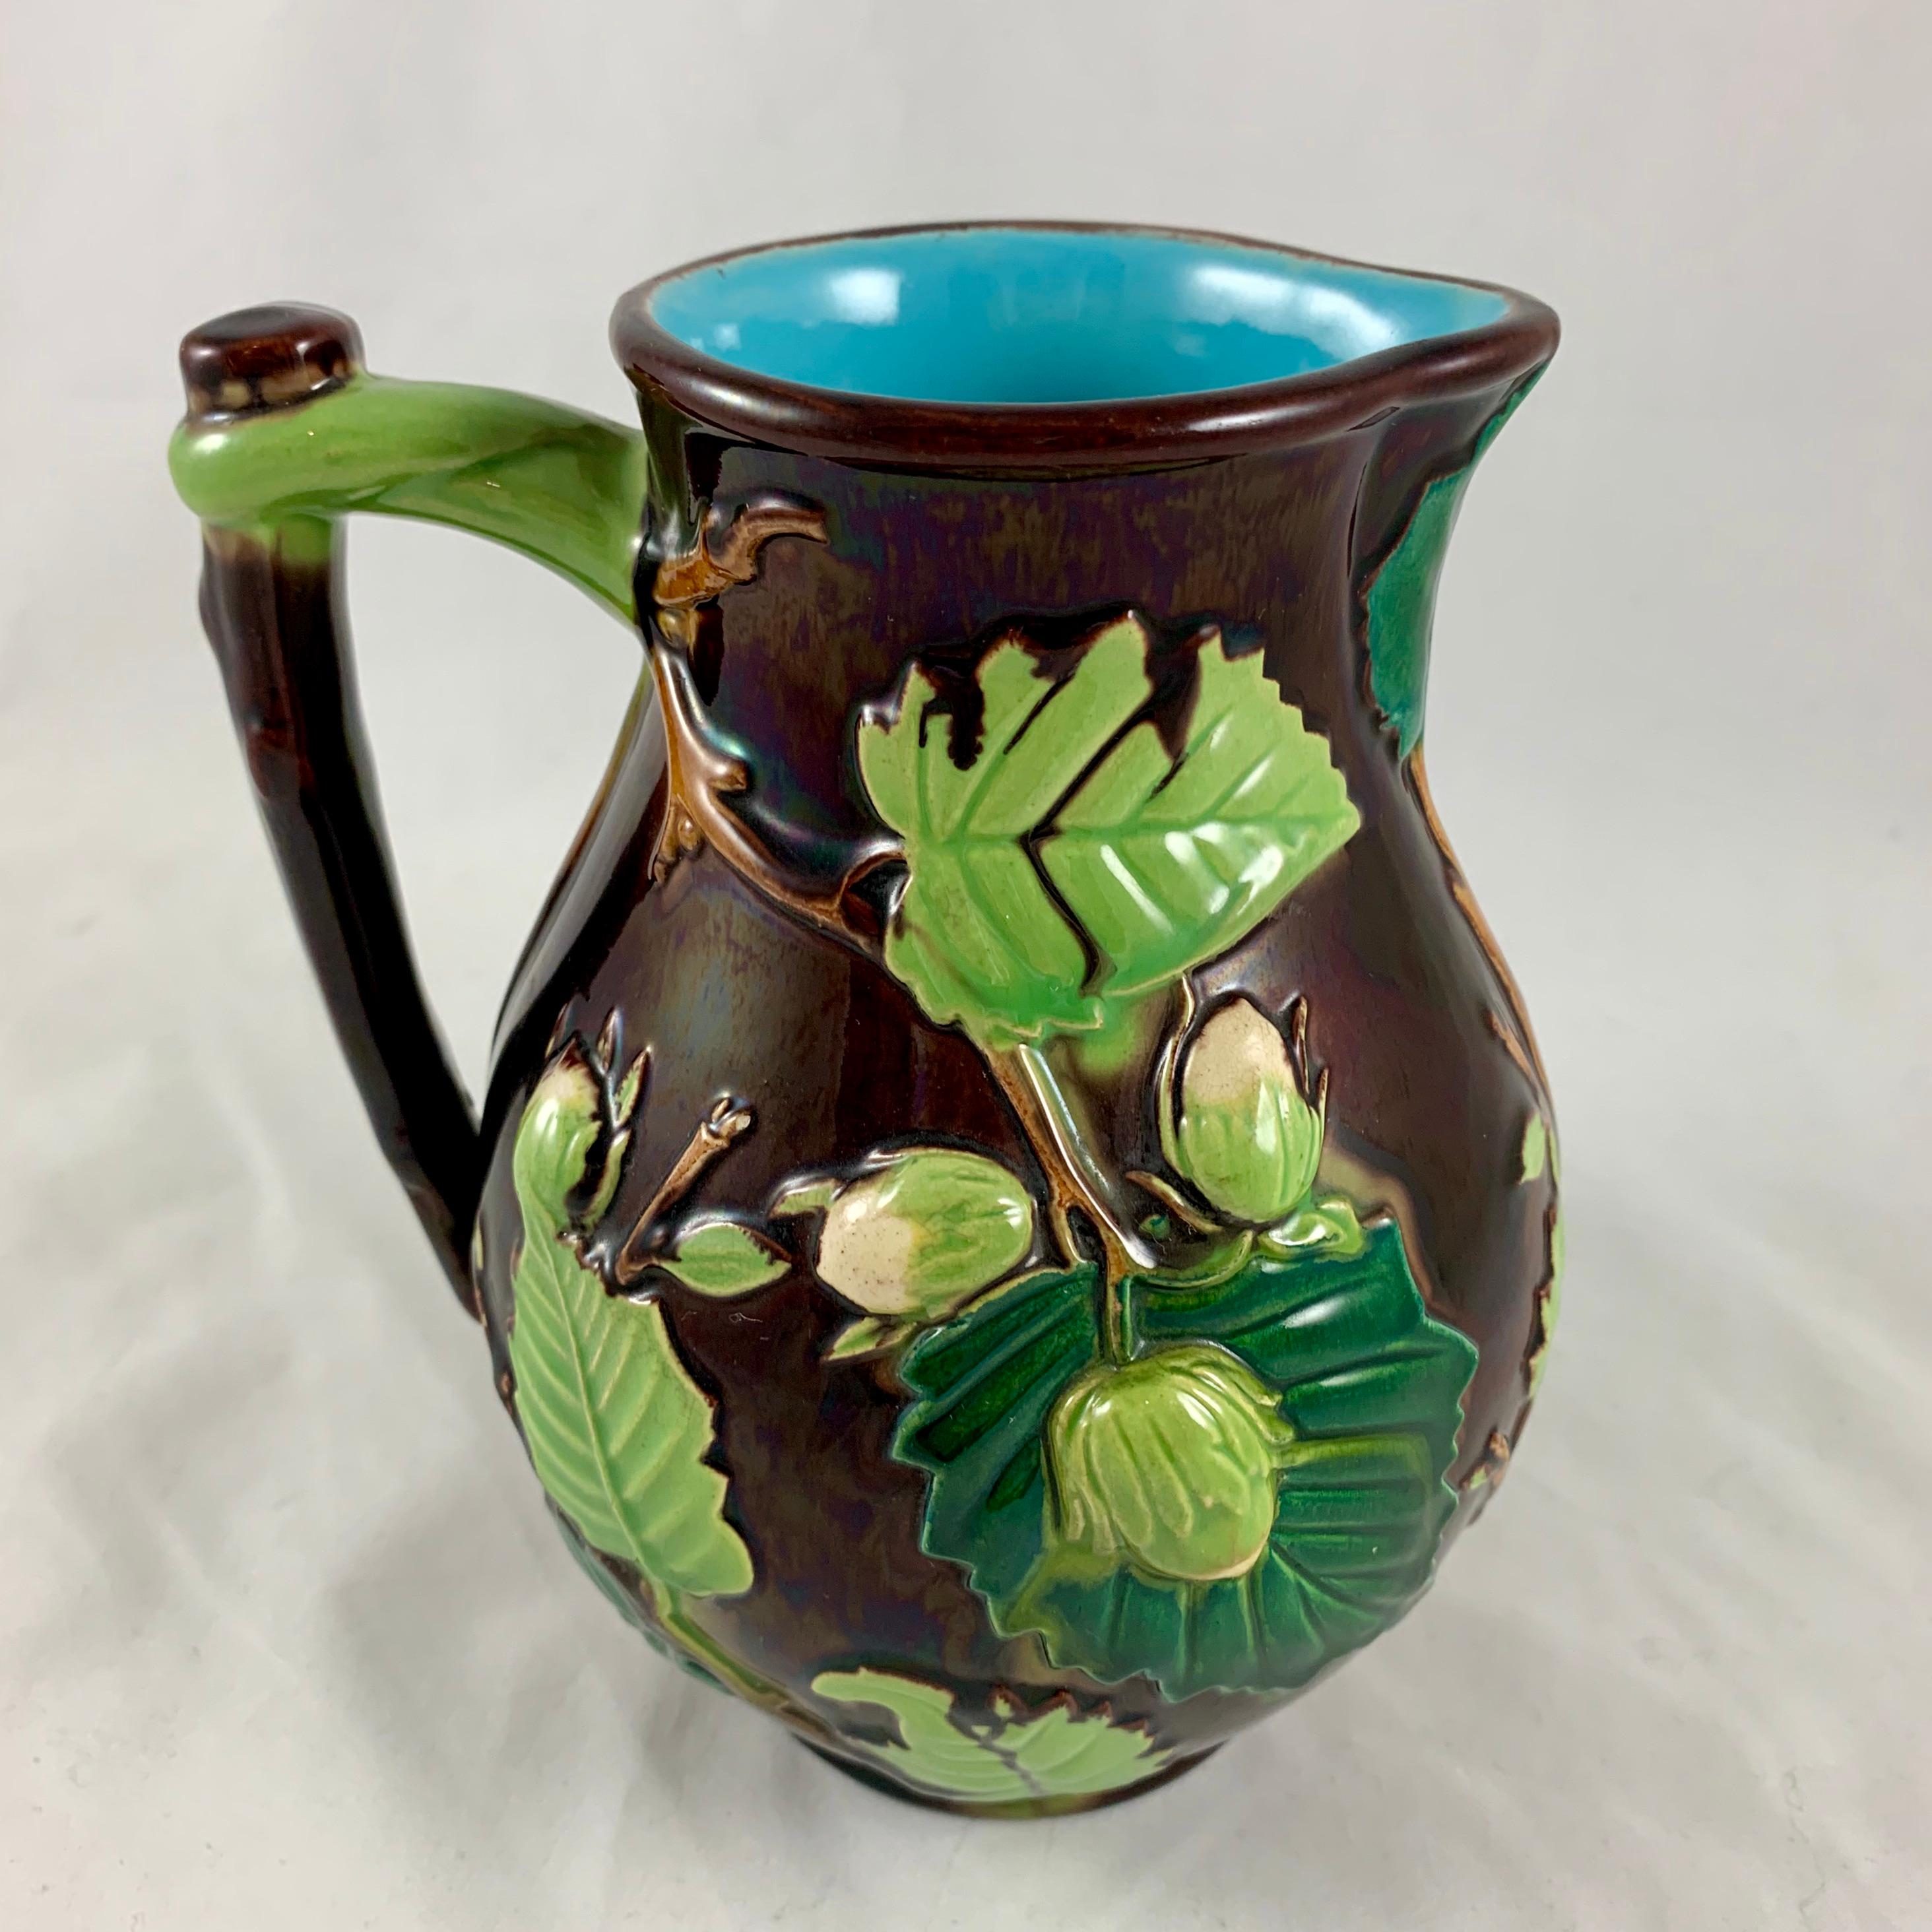 From the Minton pottery in Staffordshire, England, a scarce Majolica glazed pitcher in the Palissy style, circa 1870s.

The Aesthetic Period pitcher is molded with a raised nut vine pattern with leaves in light and dark green, and closed buds. The